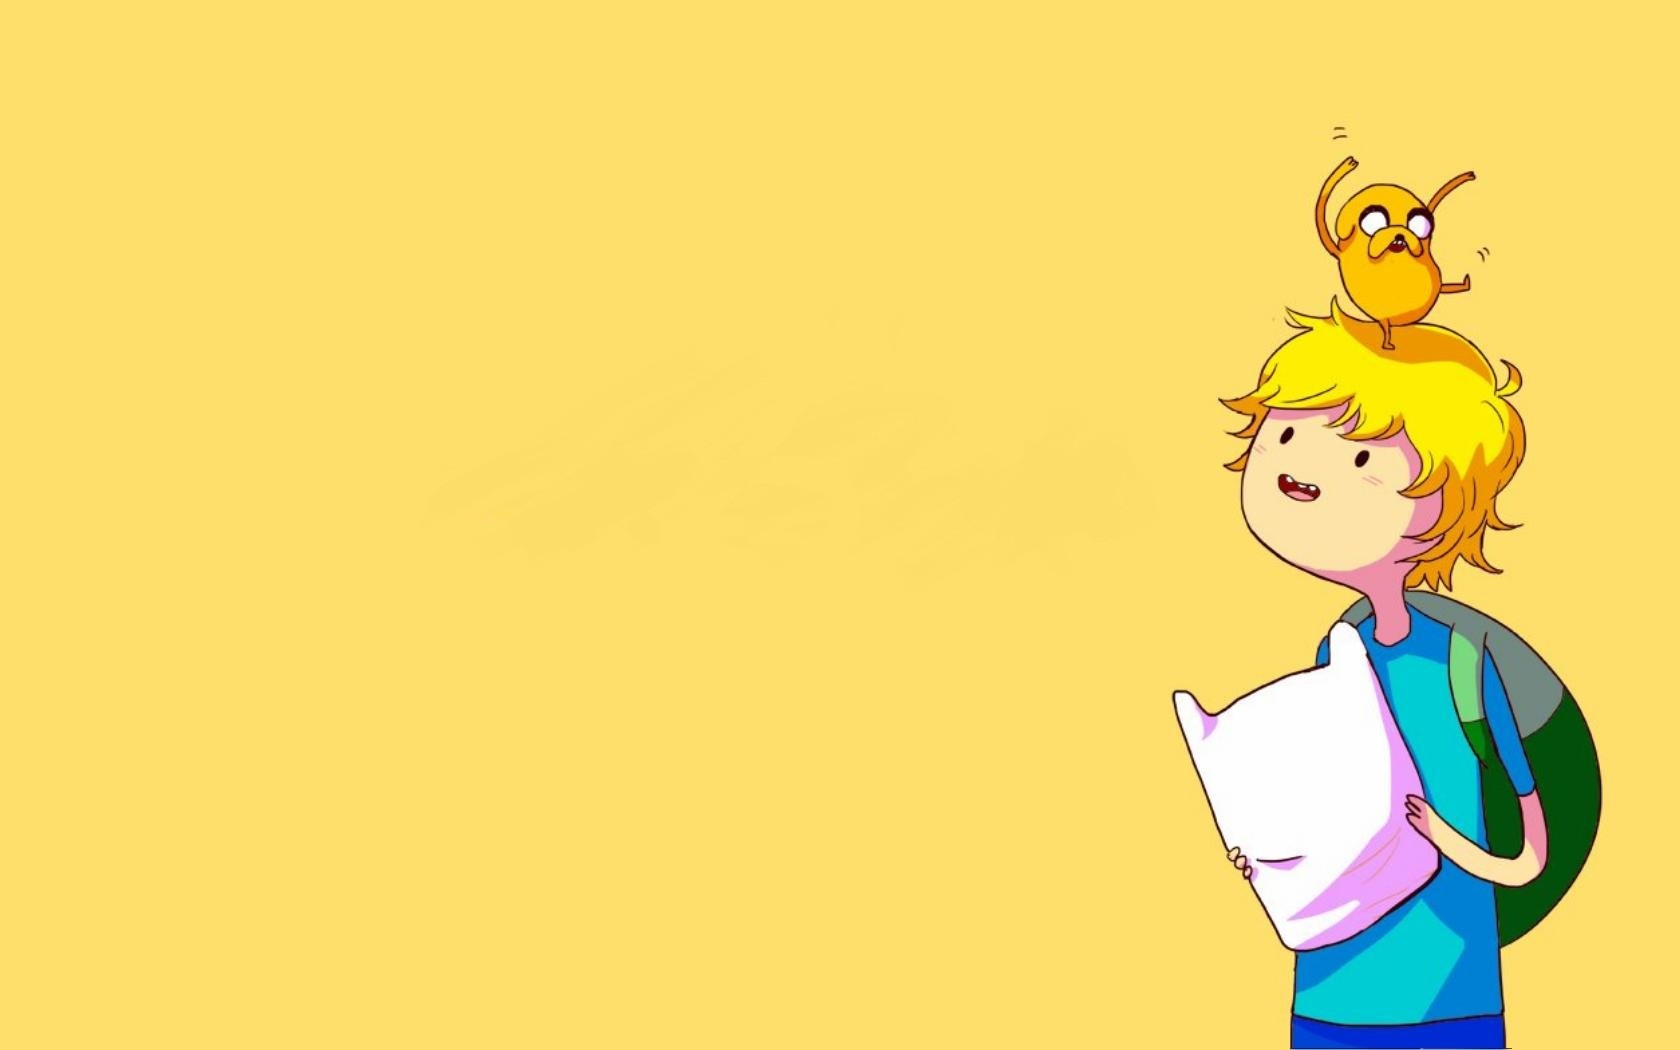 General 1680x1050 Finn the Human Jake the Dog simple background yellow background cartoon TV series Adventure Time